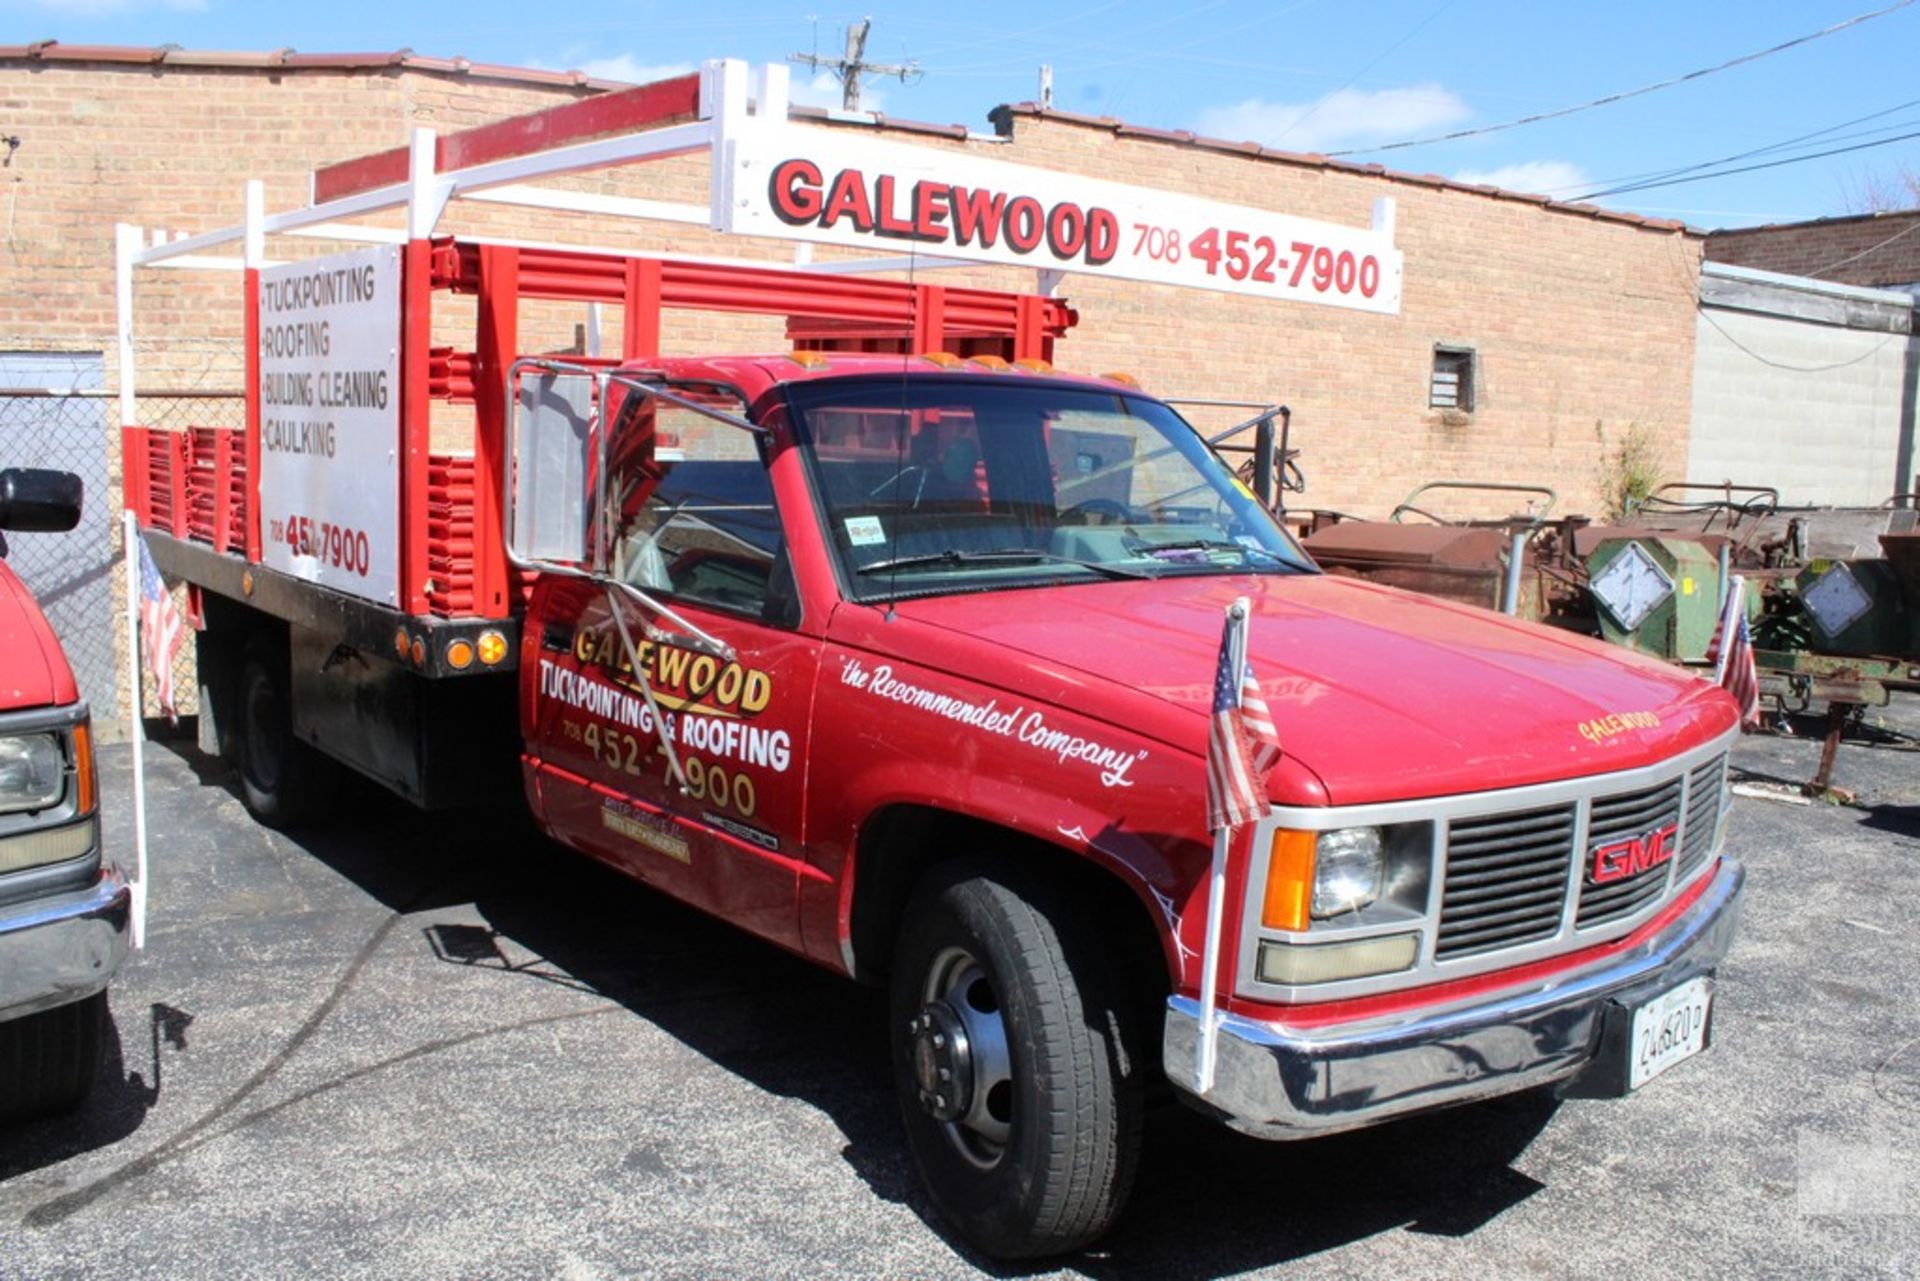 1991 GMC MODEL 3500 STAKE TRUCK, VIN: 1GDJC34K6ME507692, 12' STEEL DECK WITH REMOVABLE GUARDS, - Image 2 of 7